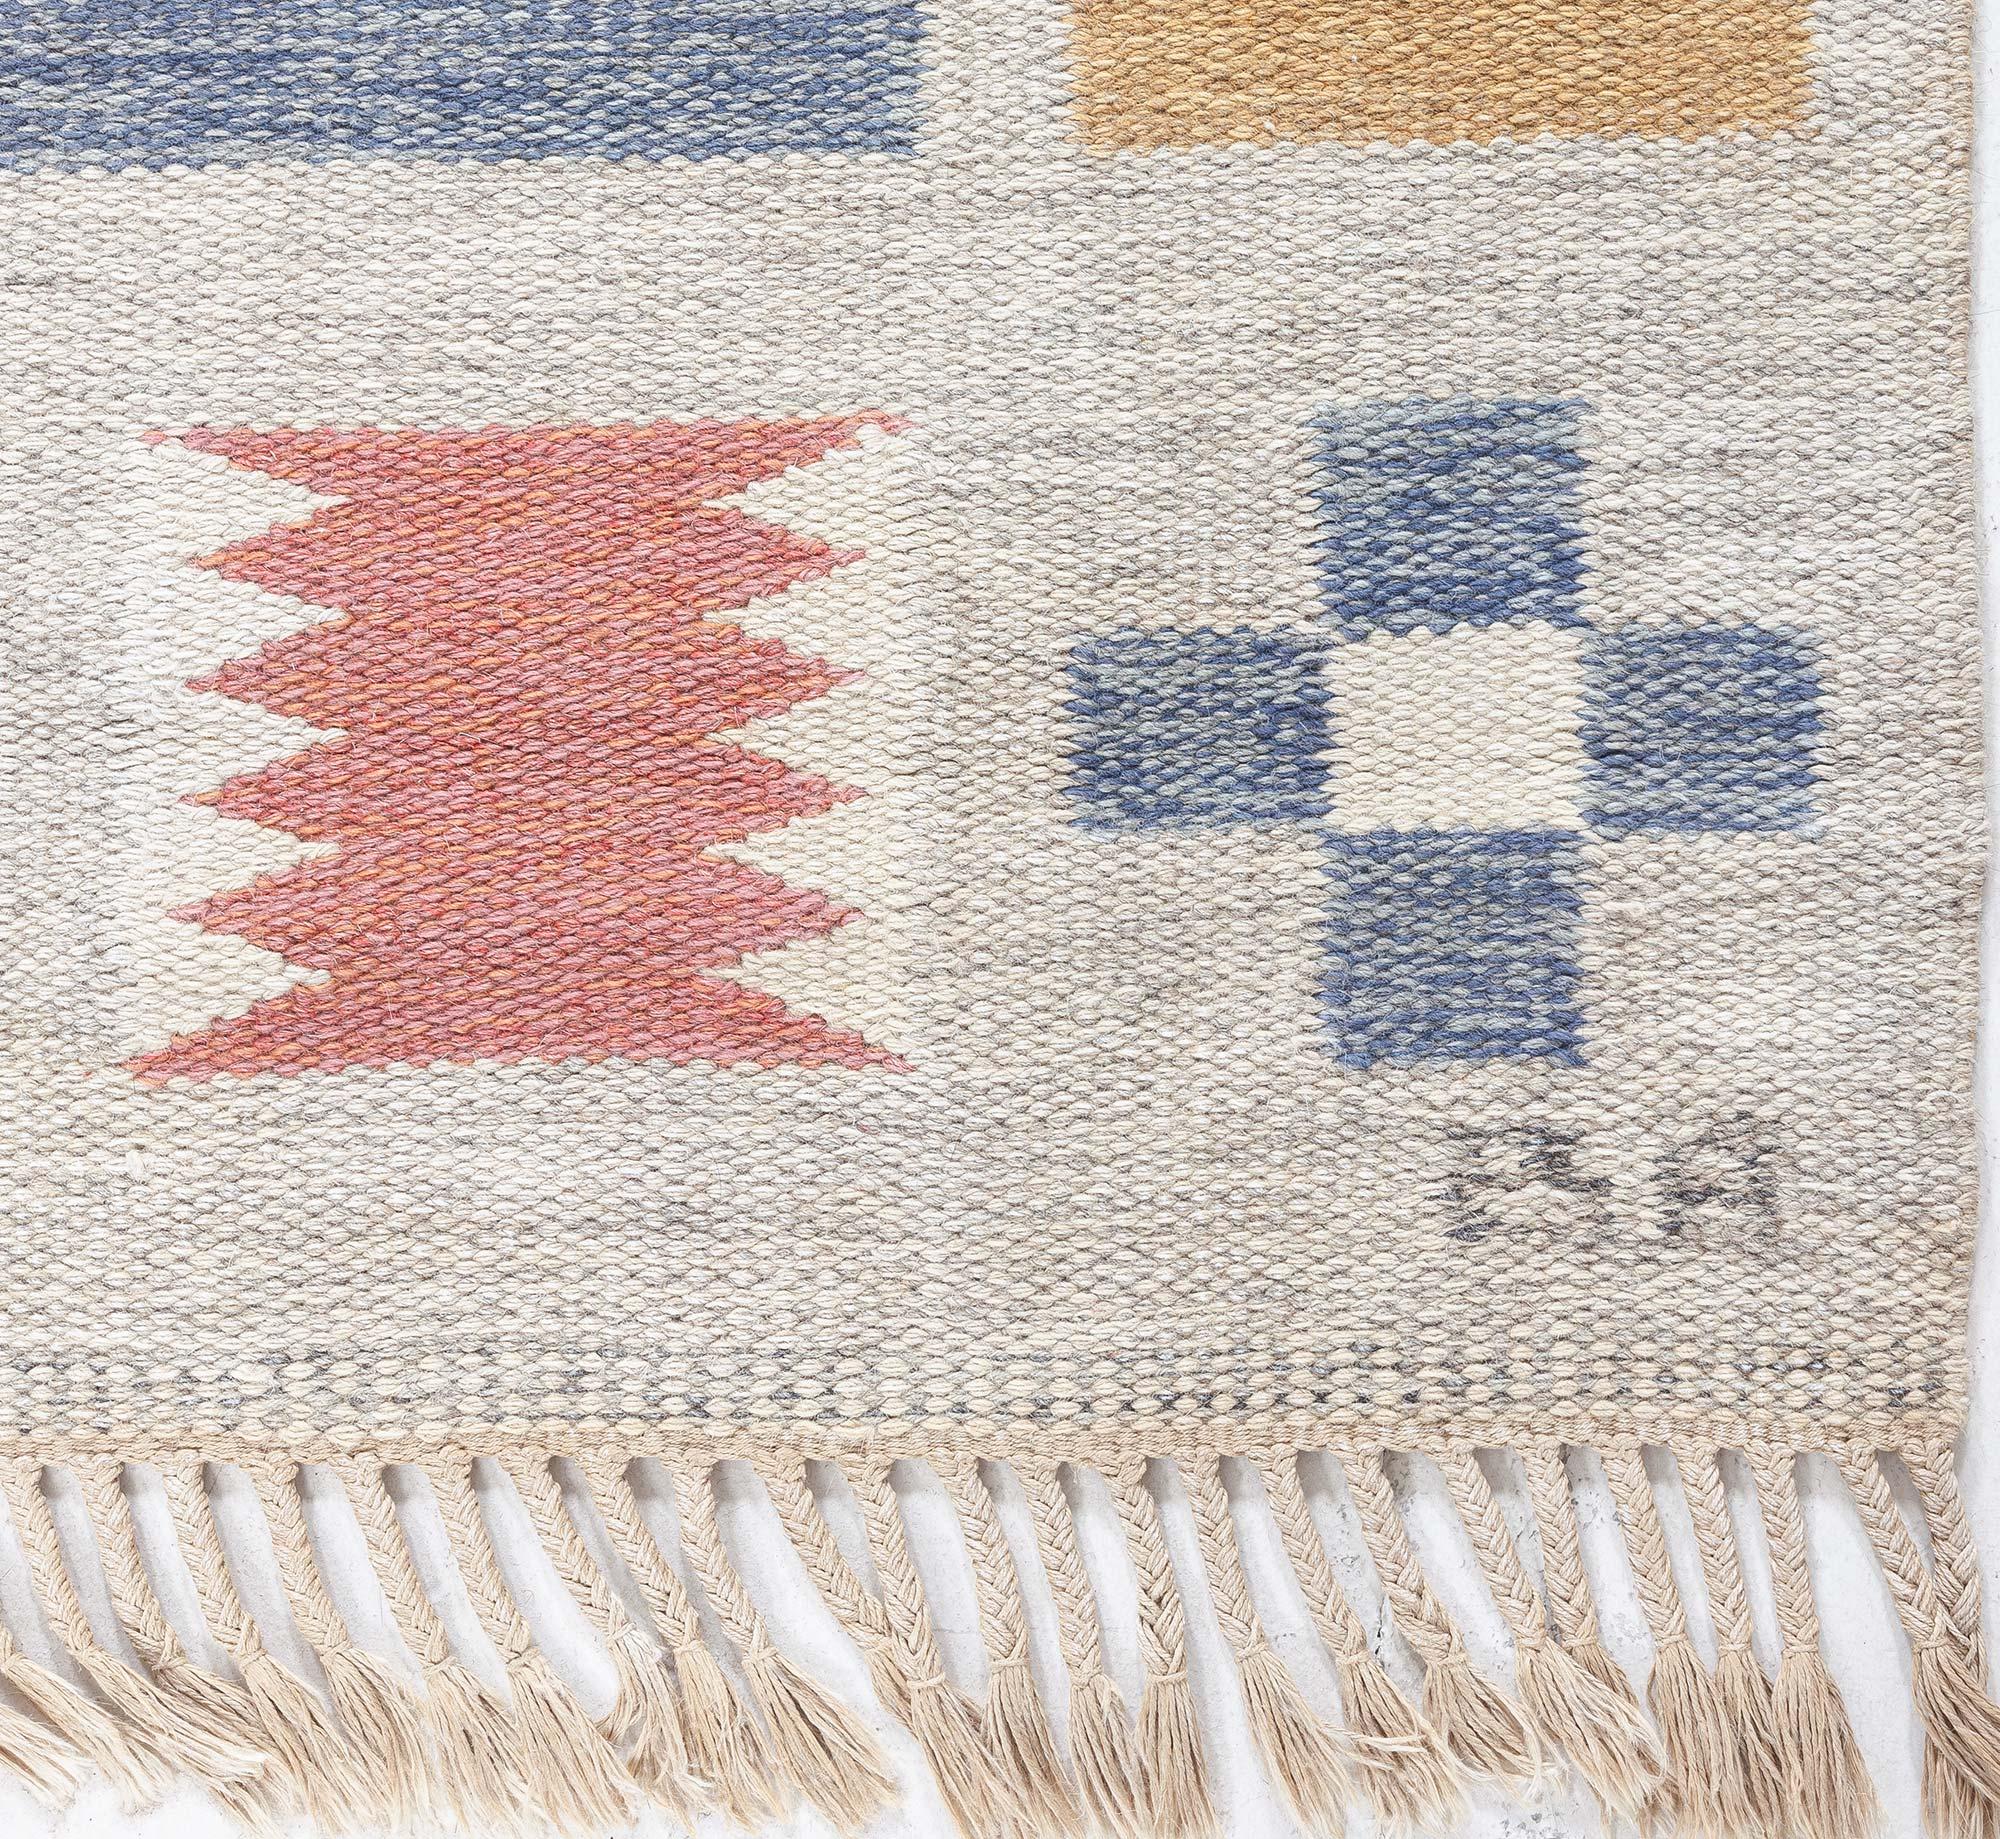 Vintage Swedish Flat Woven Rug by Bitte Ahlgren In Good Condition For Sale In New York, NY